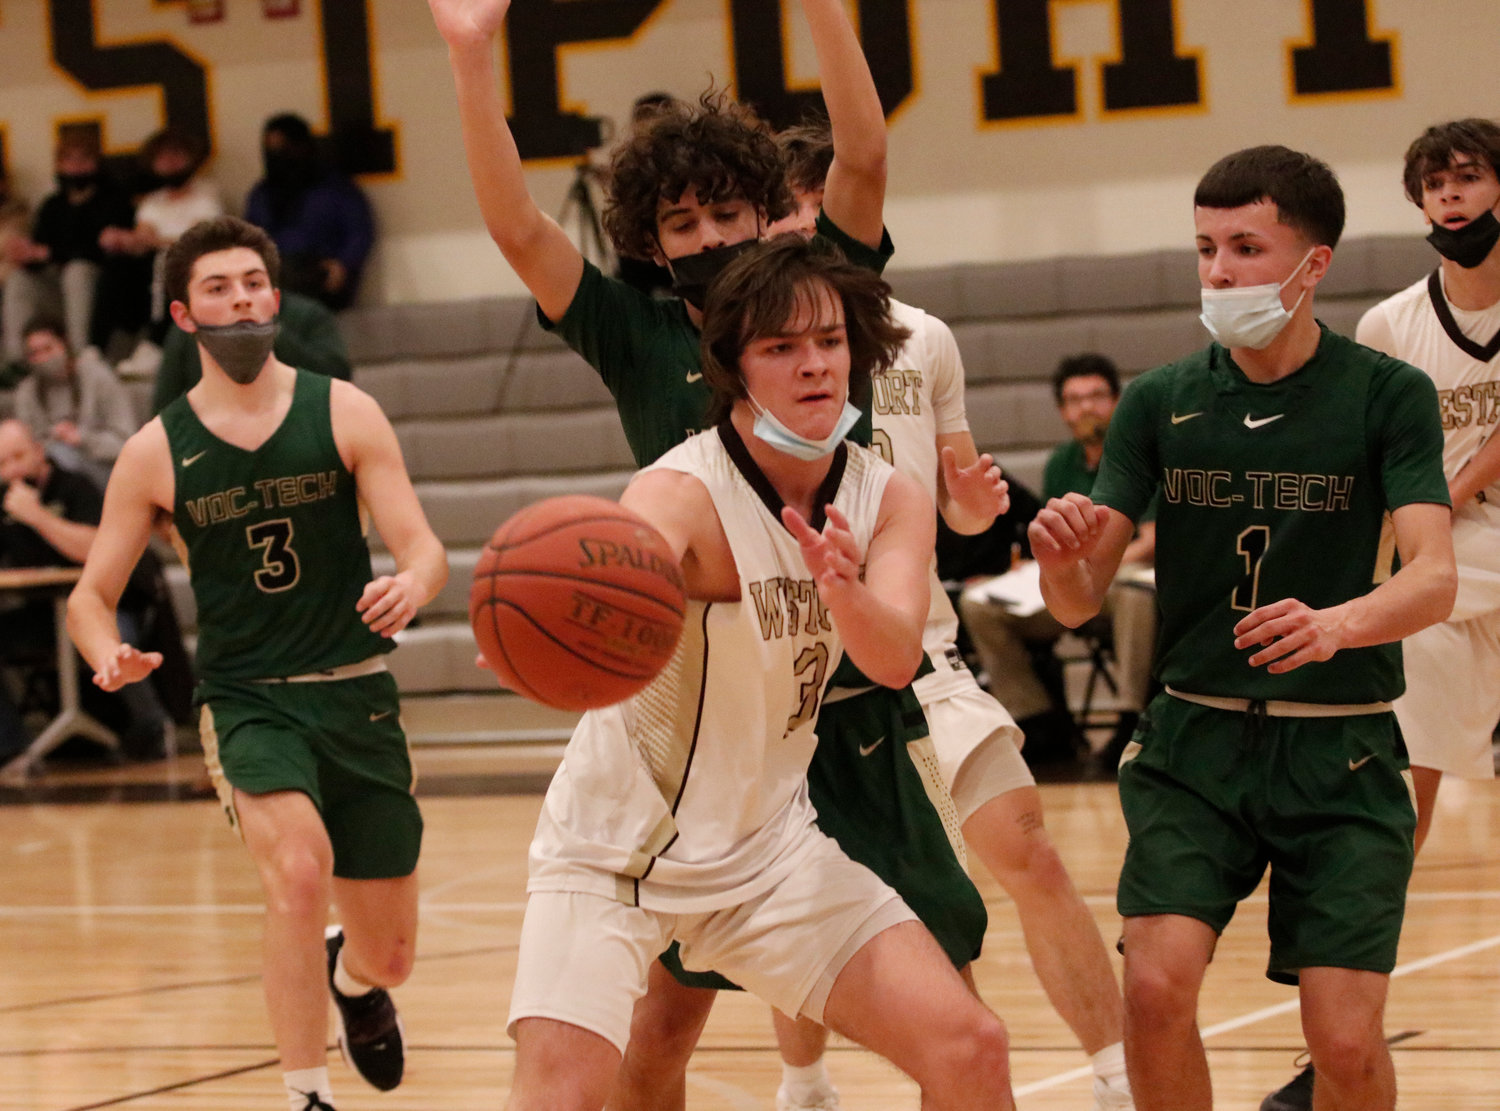 Cam Leary makes a pass as the Wildcats get into their offense during a non-league home game against Great New Bedford on Wednesday. Leary, Jayden Zuber and Ben Poitras came off the bench and combined for 18 points for the Wildcats in a 62-53 victory.